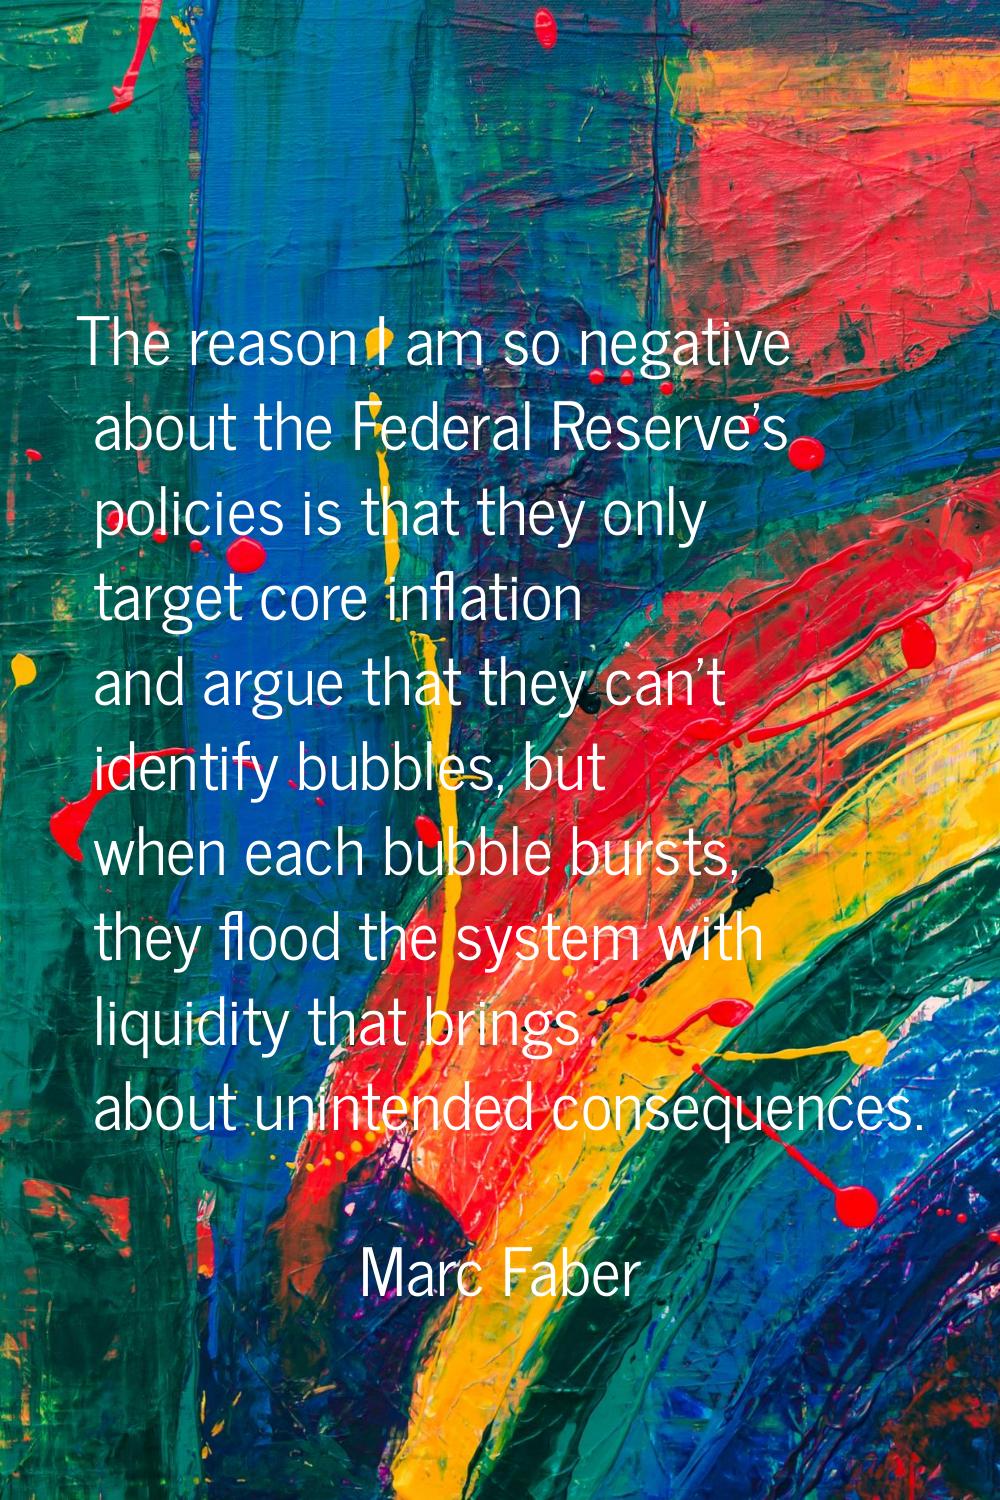 The reason I am so negative about the Federal Reserve's policies is that they only target core infl